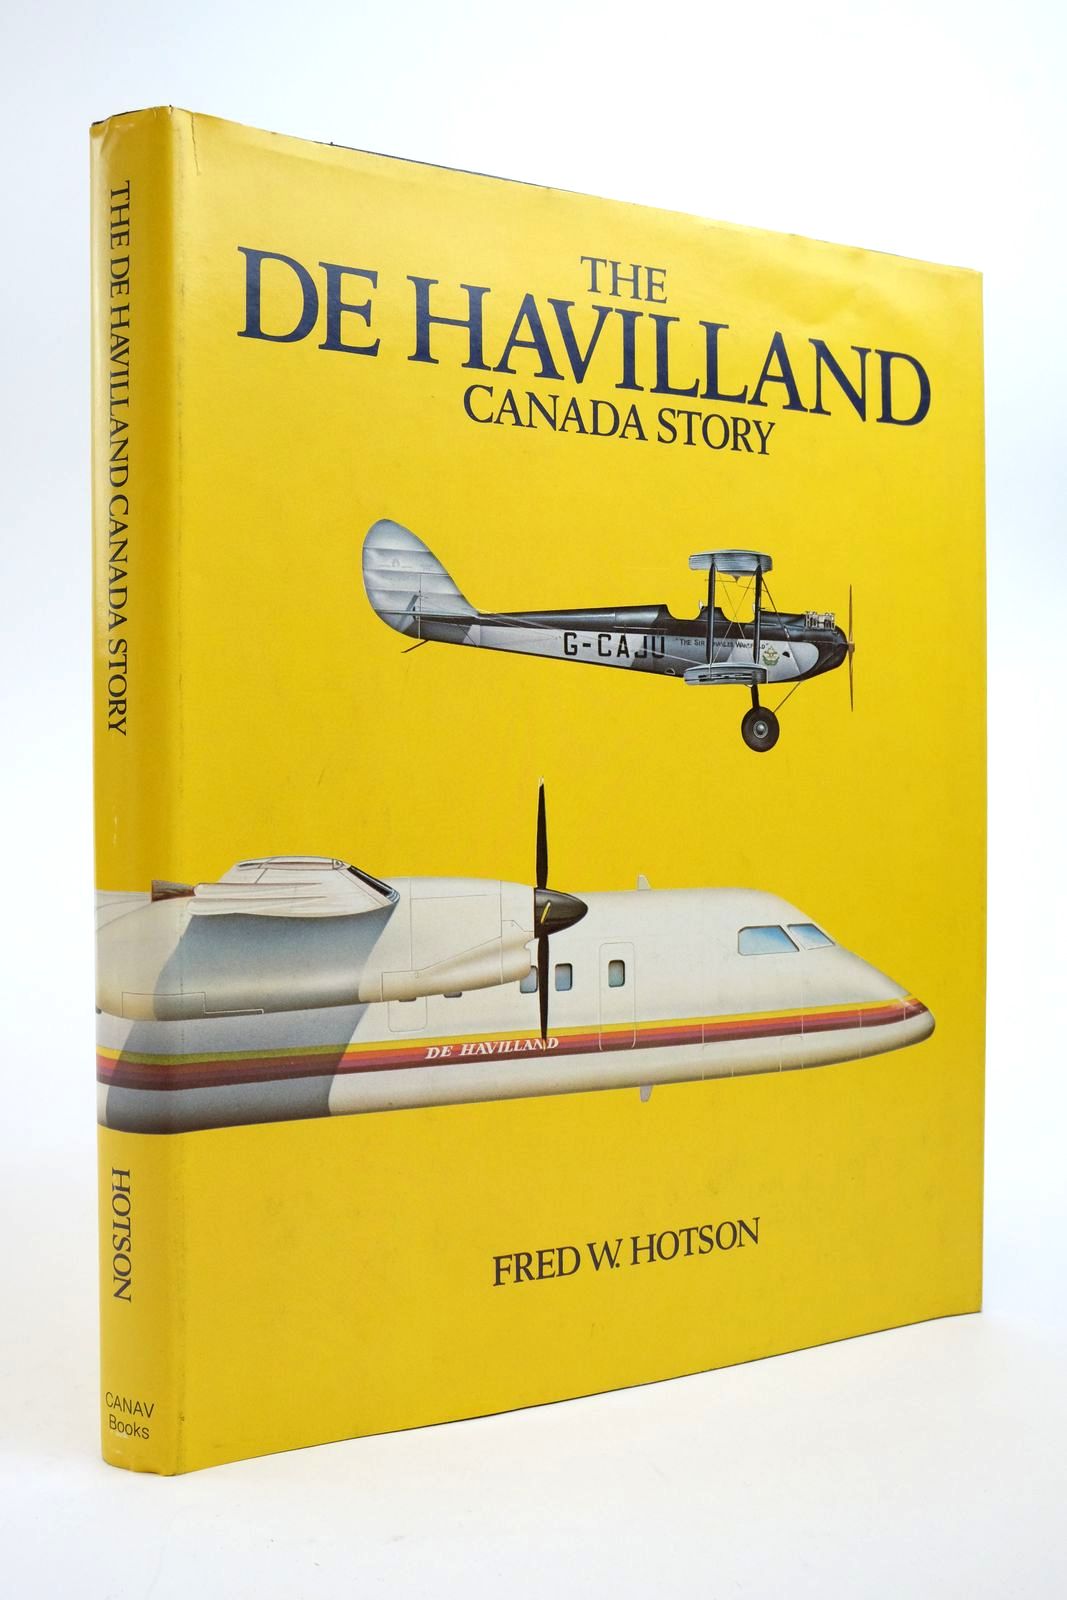 Photo of THE DE HAVILLAND CANADA STORY written by Hotson, Fred W. published by Canav Books (STOCK CODE: 2138473)  for sale by Stella & Rose's Books